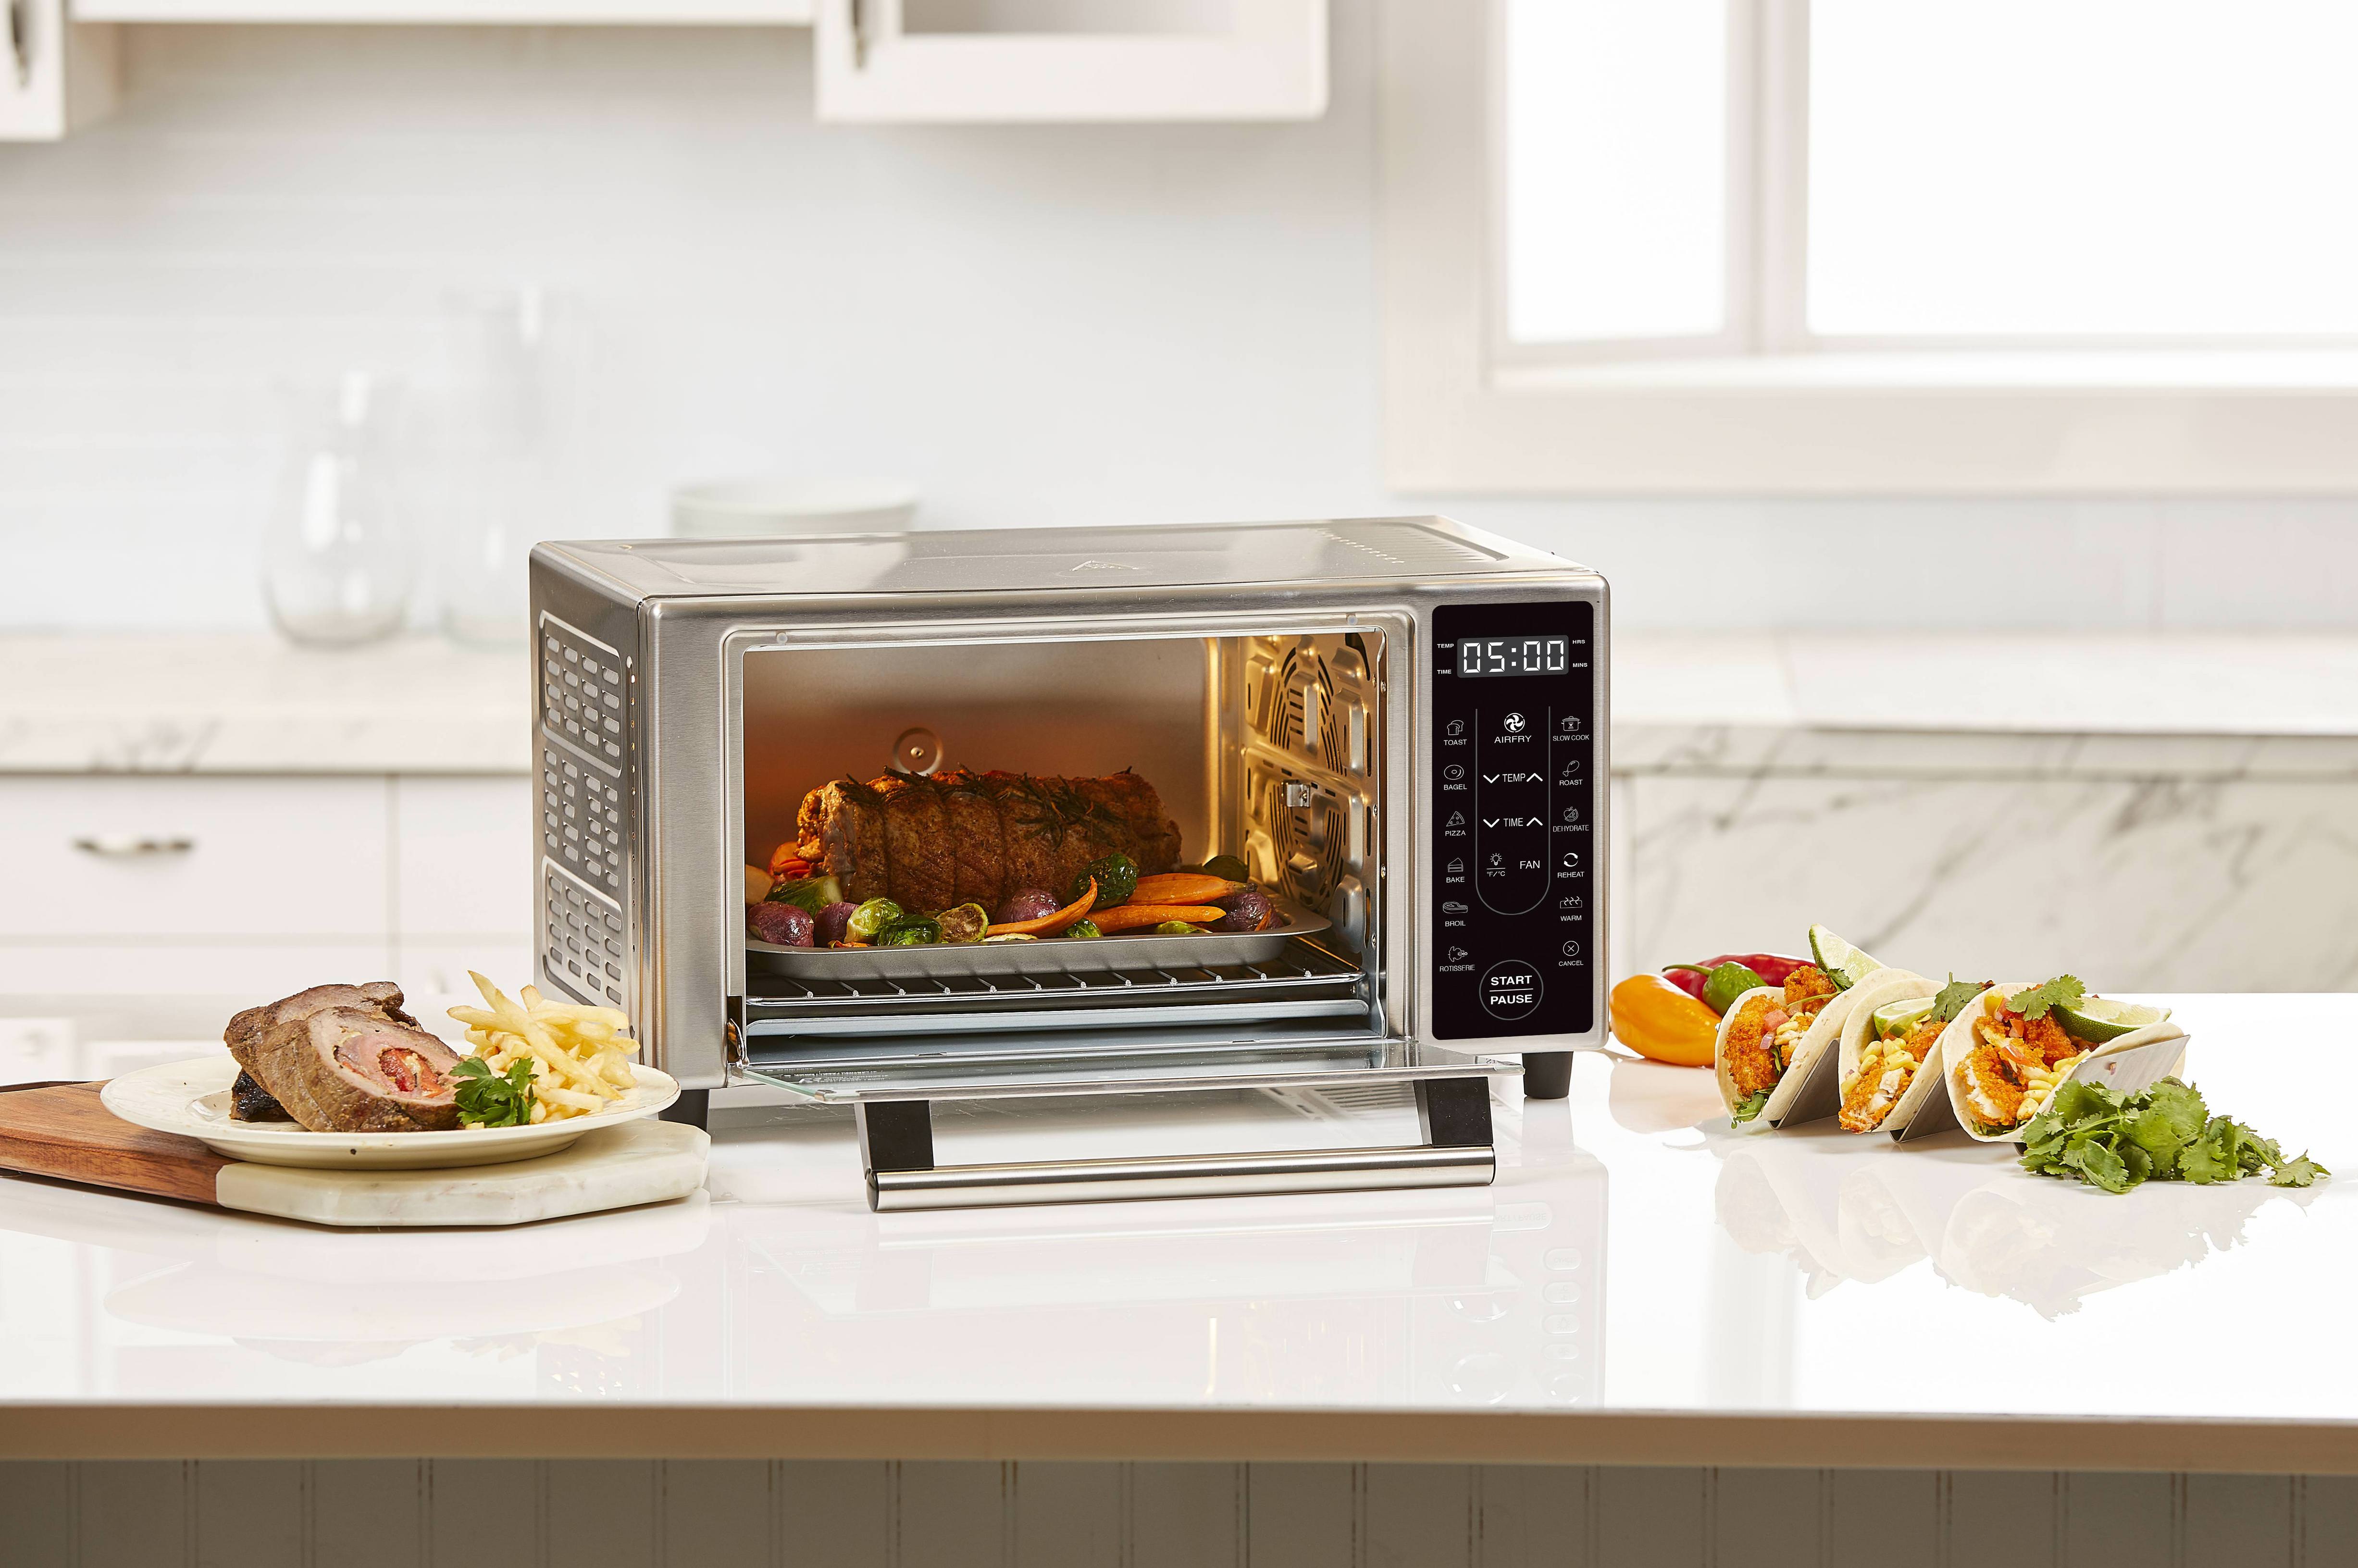 Emeril Lagasse Power AirFryer 360 Plus, Toaster Oven, Stainless Steel, 1500 Watts $68.00 + Free Shipping